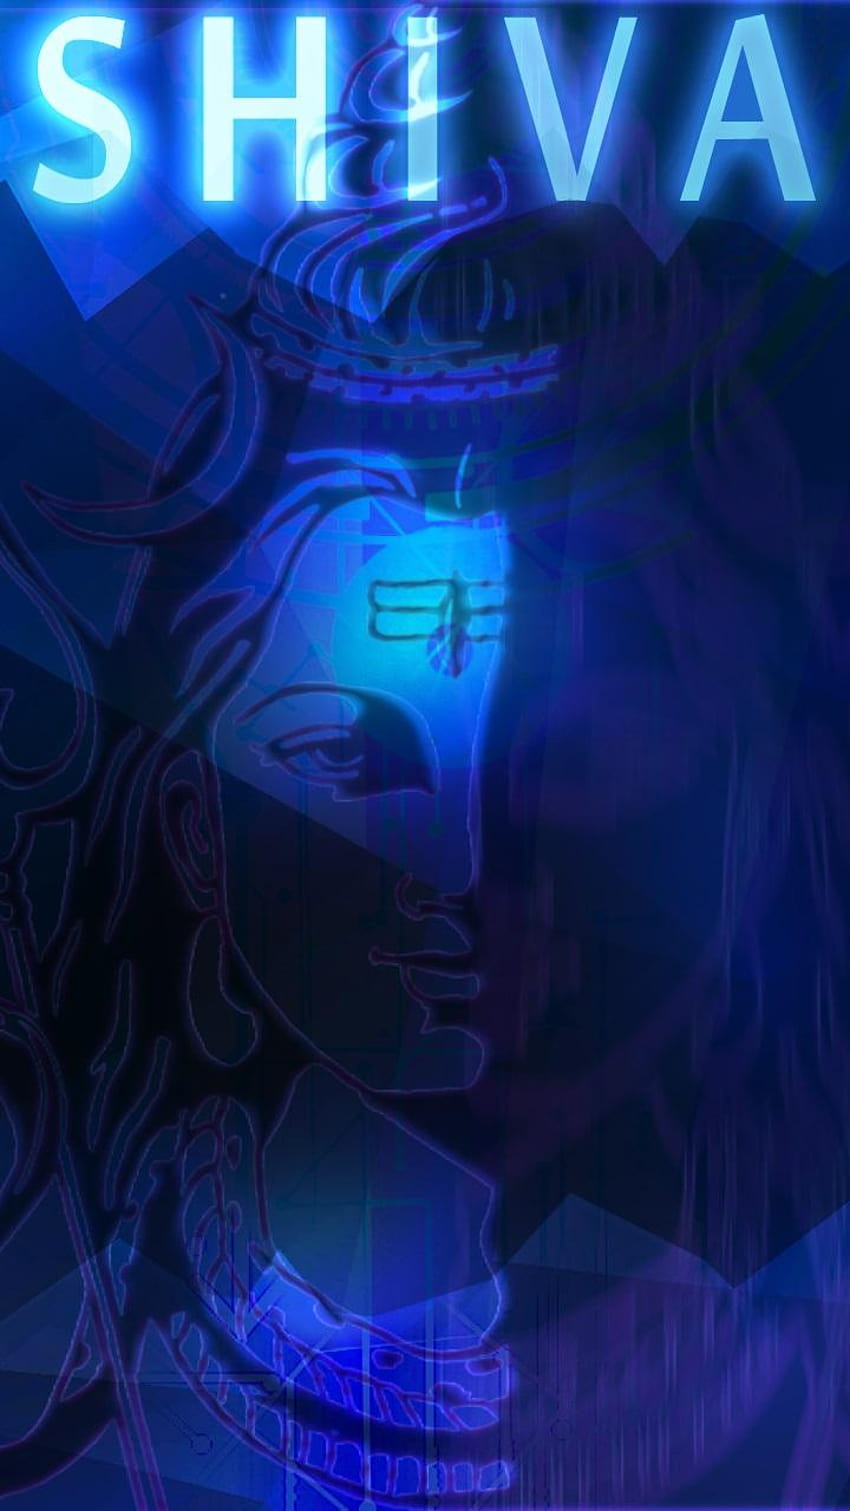 Lord Shiva Concentrating Mobile 720x1280, lord shiva mobile HD phone wallpaper